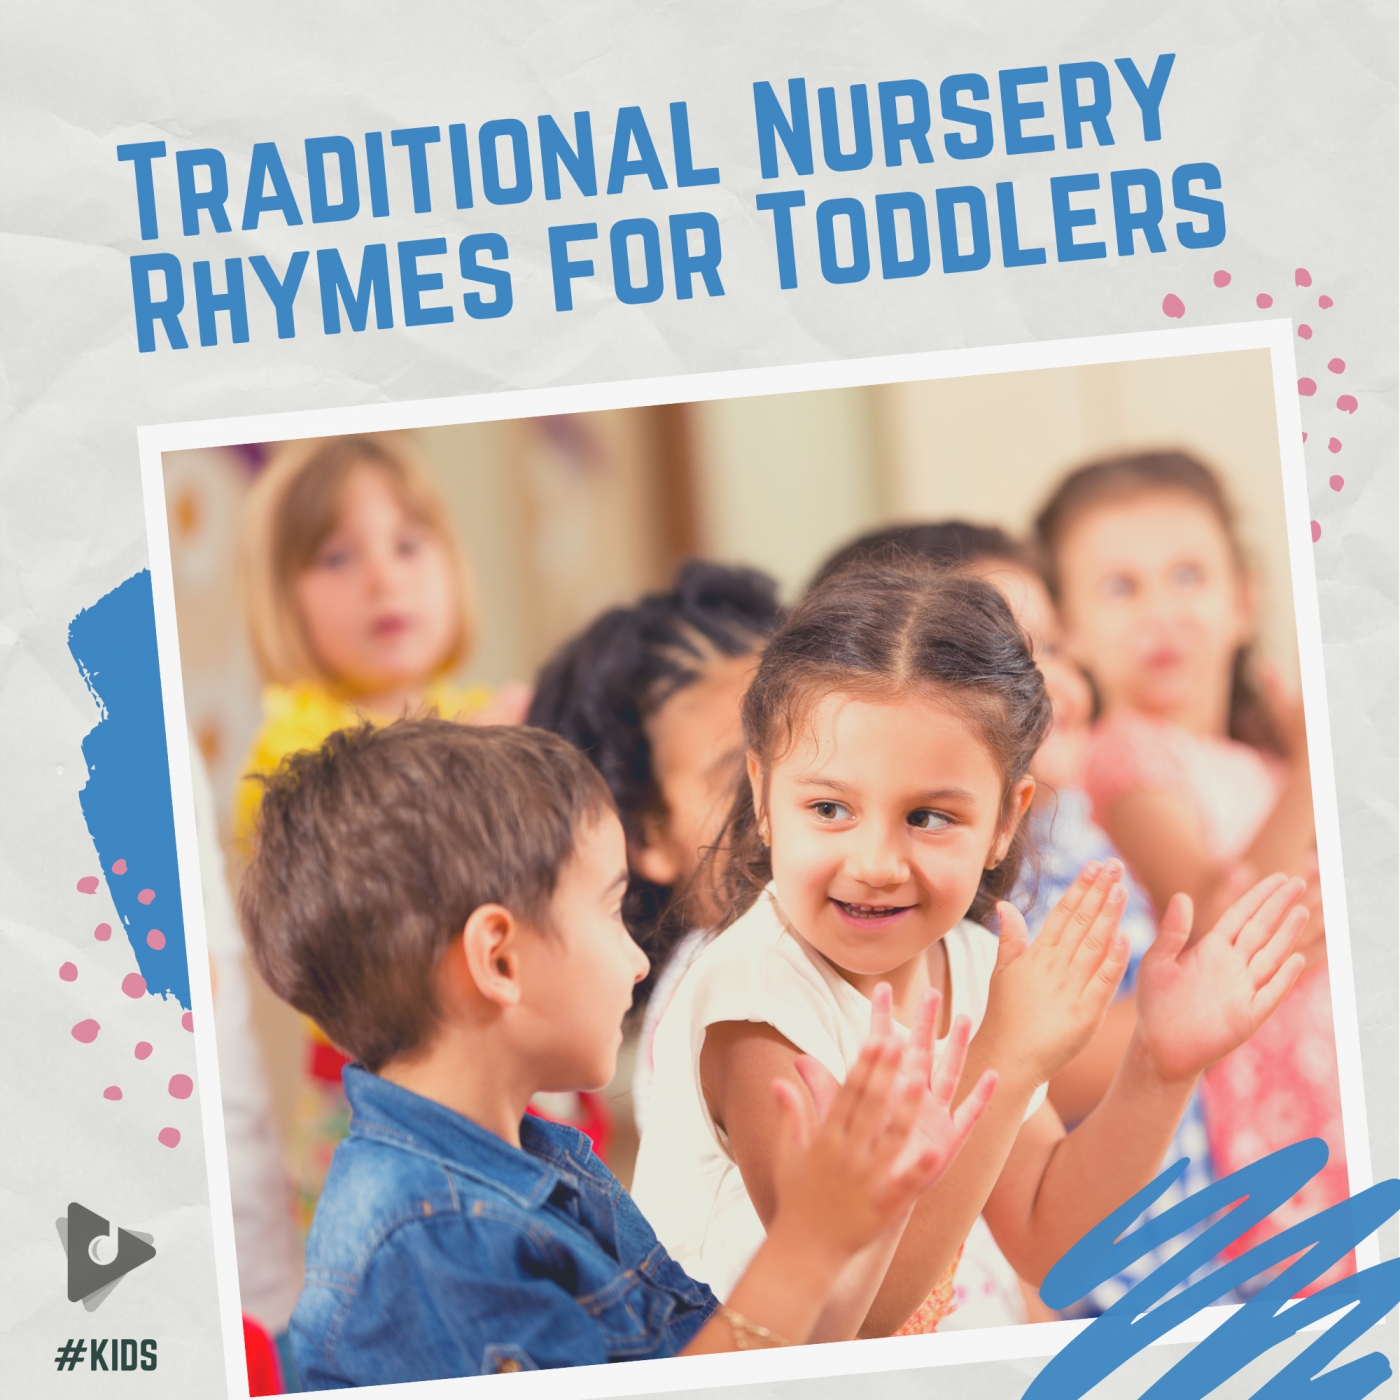 Traditional Nursery Rhymes for Toddlers